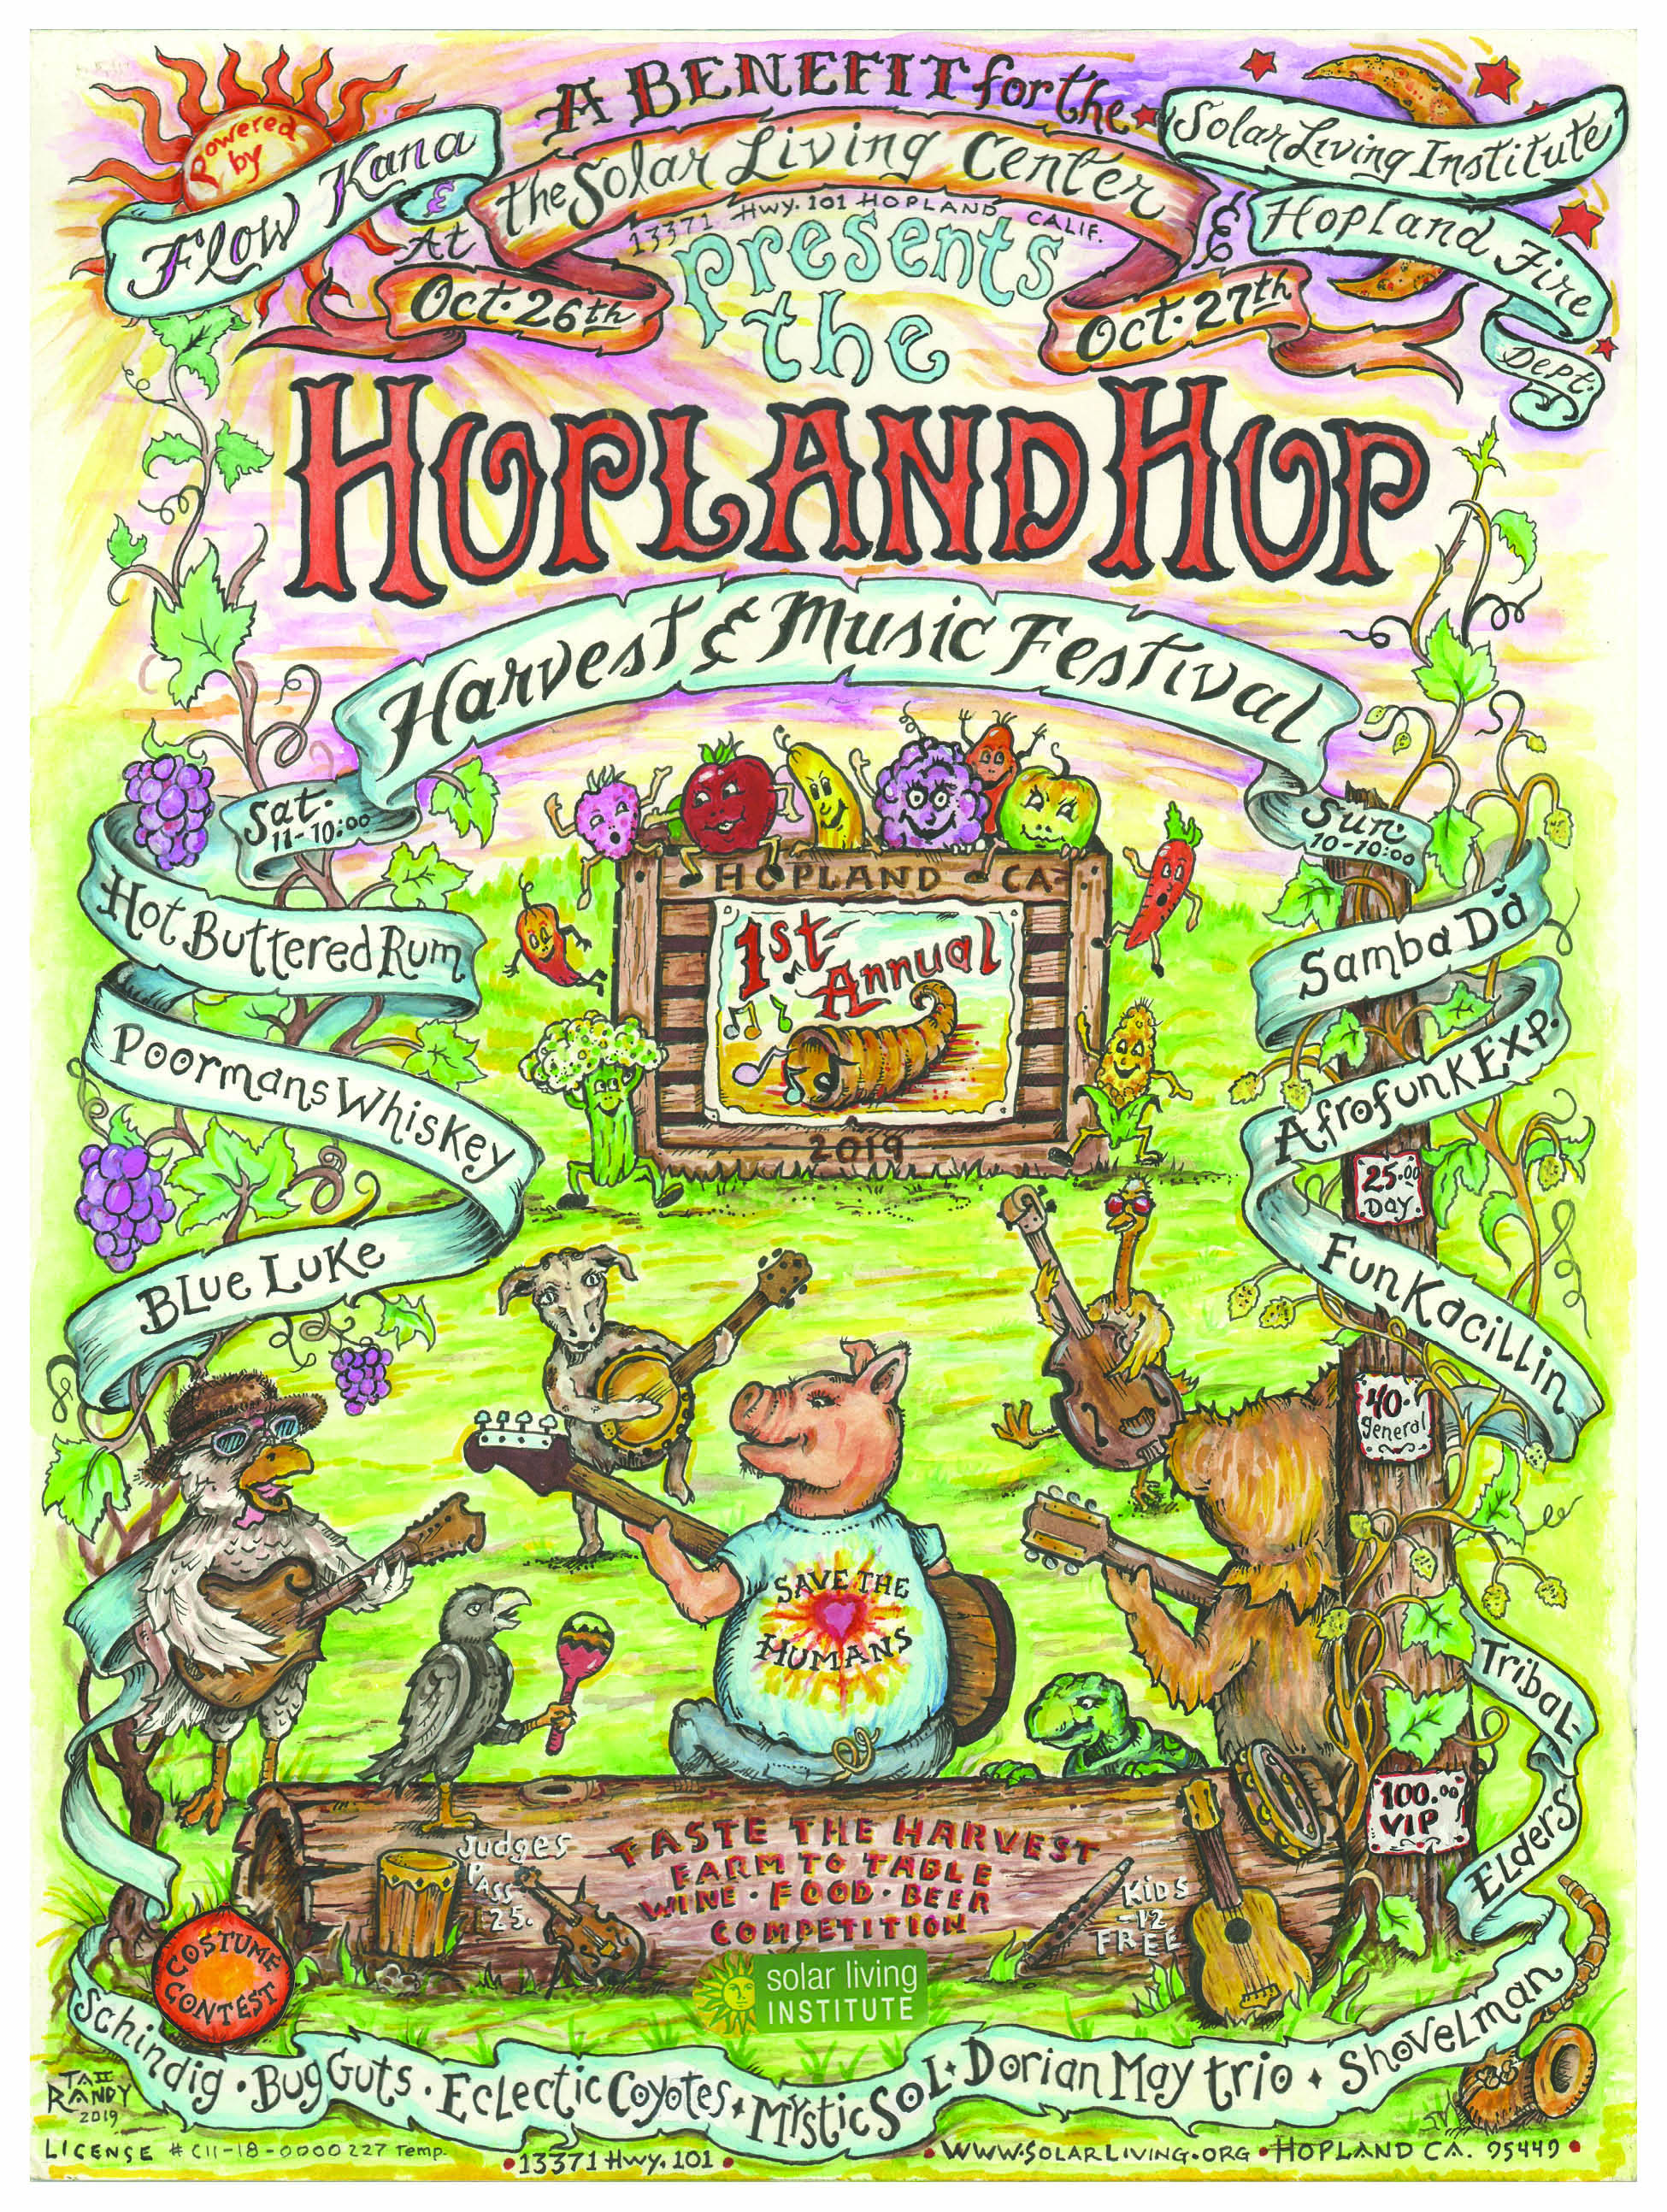 Announcing the The Hopland Hop - Harvest & Music Festival